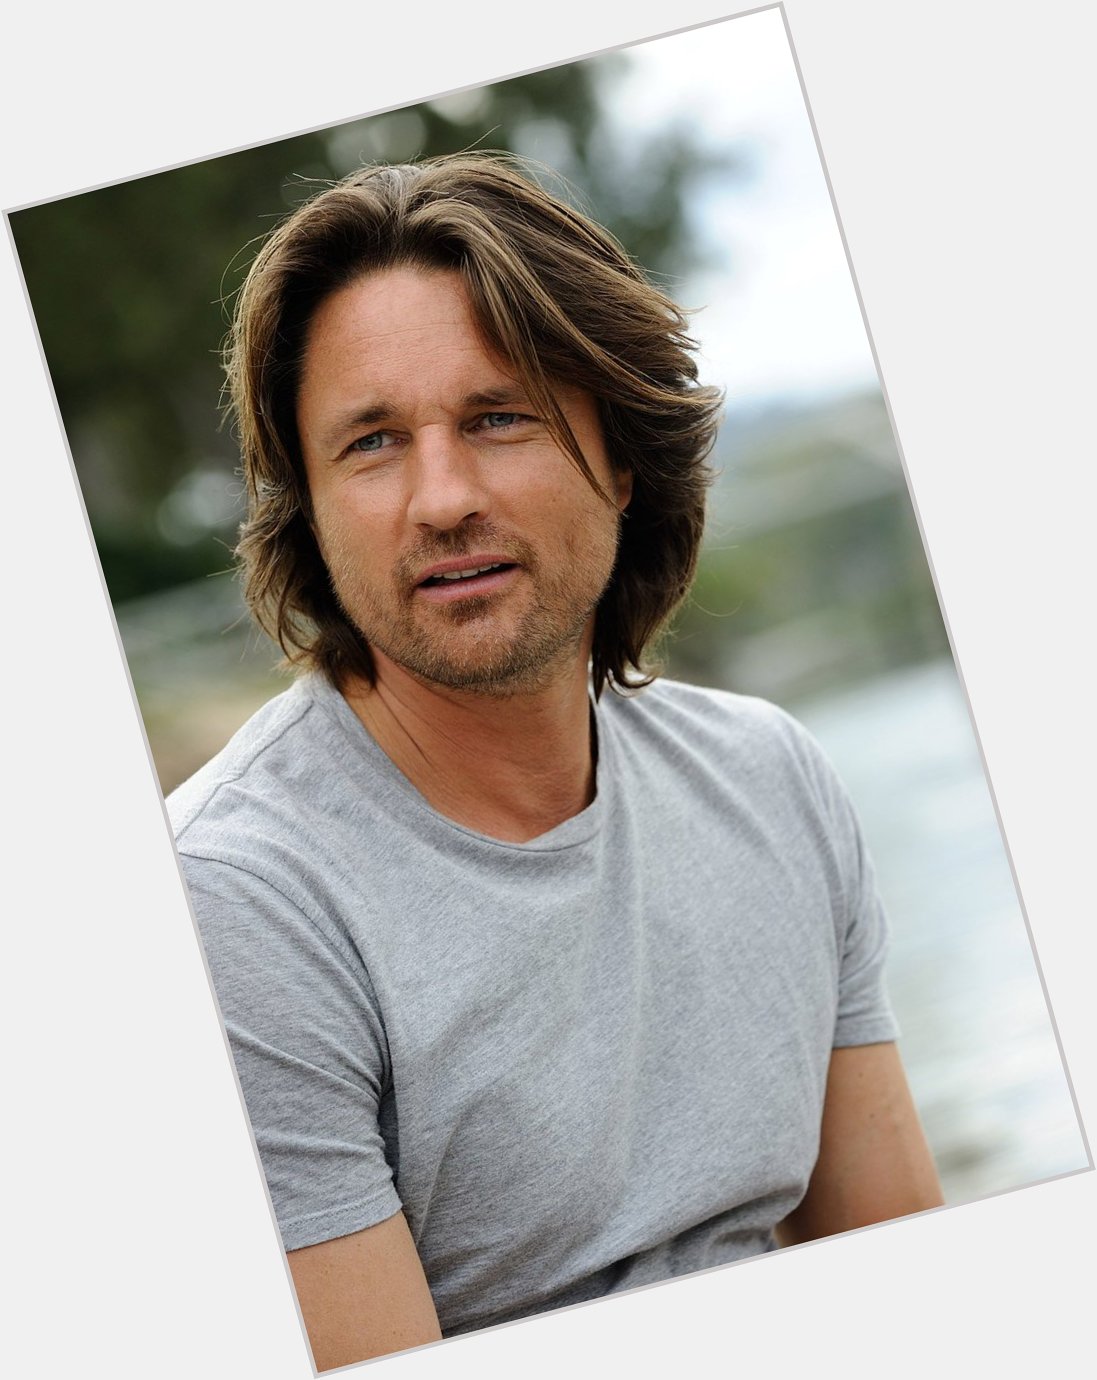 From,Auckland, New Zealand,happy birthday to the big actor,Martin Henderson,he turns,44 years today       